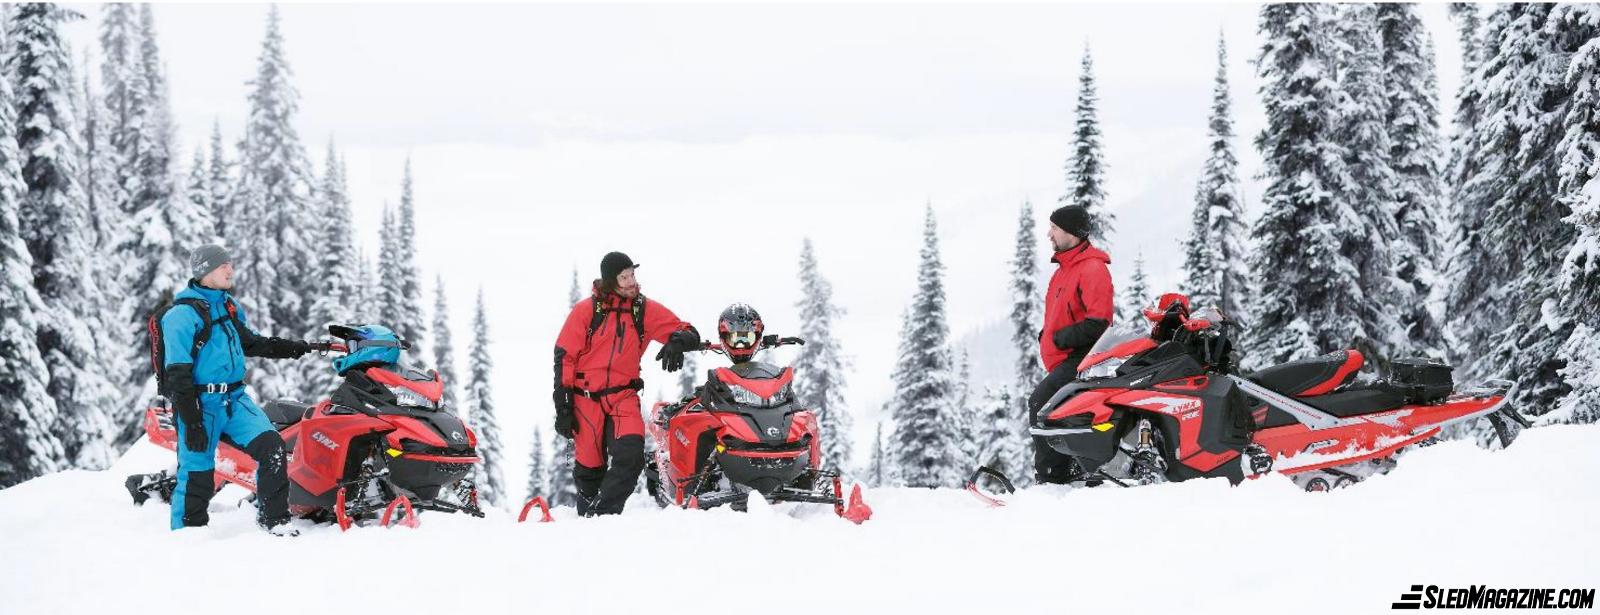 Overview of the New 2022 Ski-Doo Products - Snowmobile